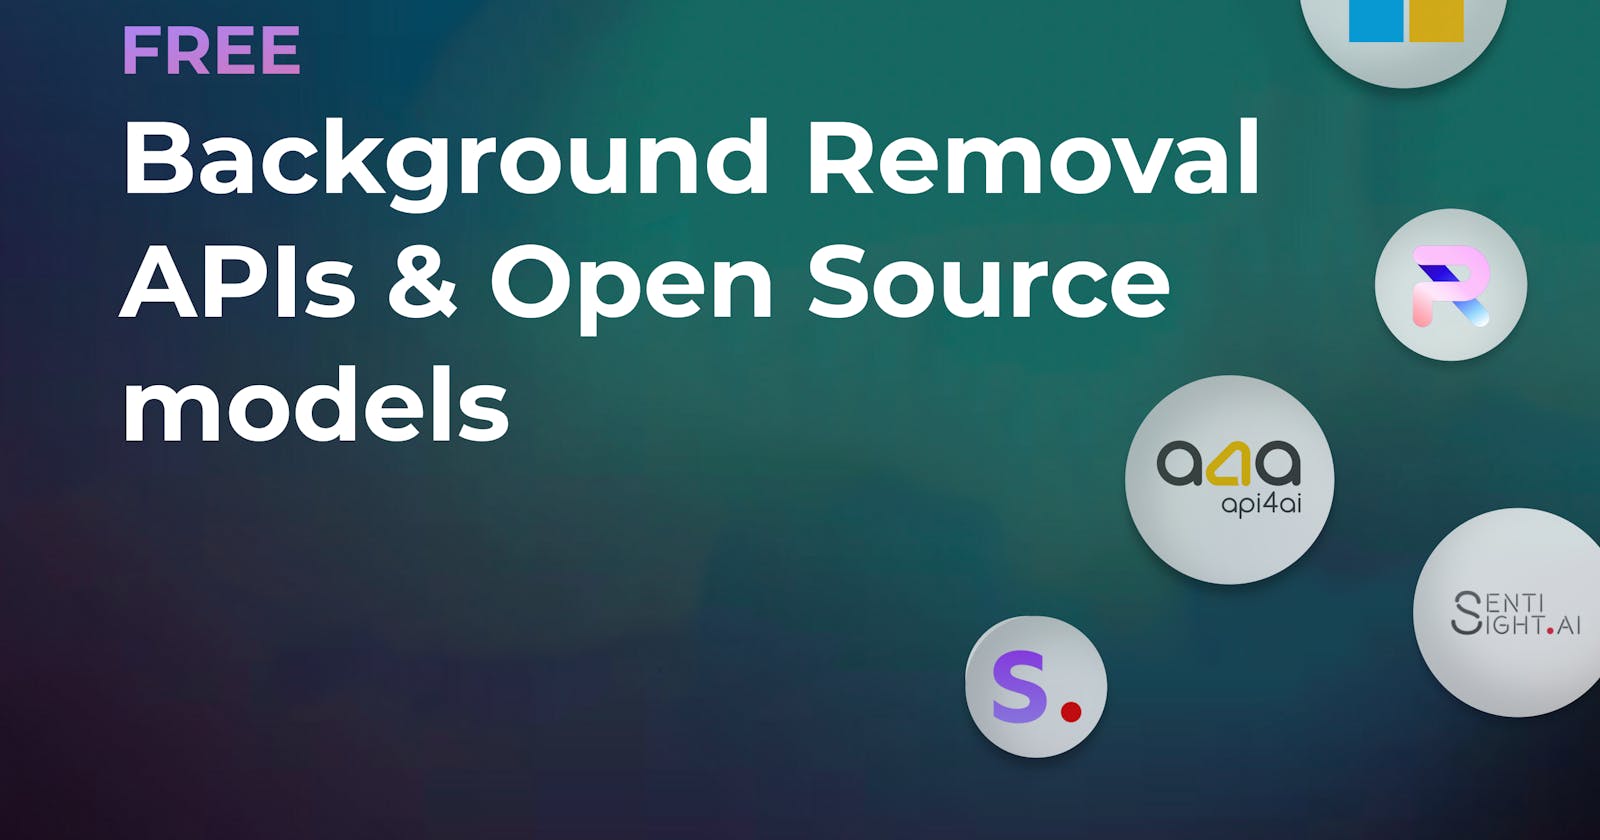 Top Free Background Removal tools, APIs, and Open Source models